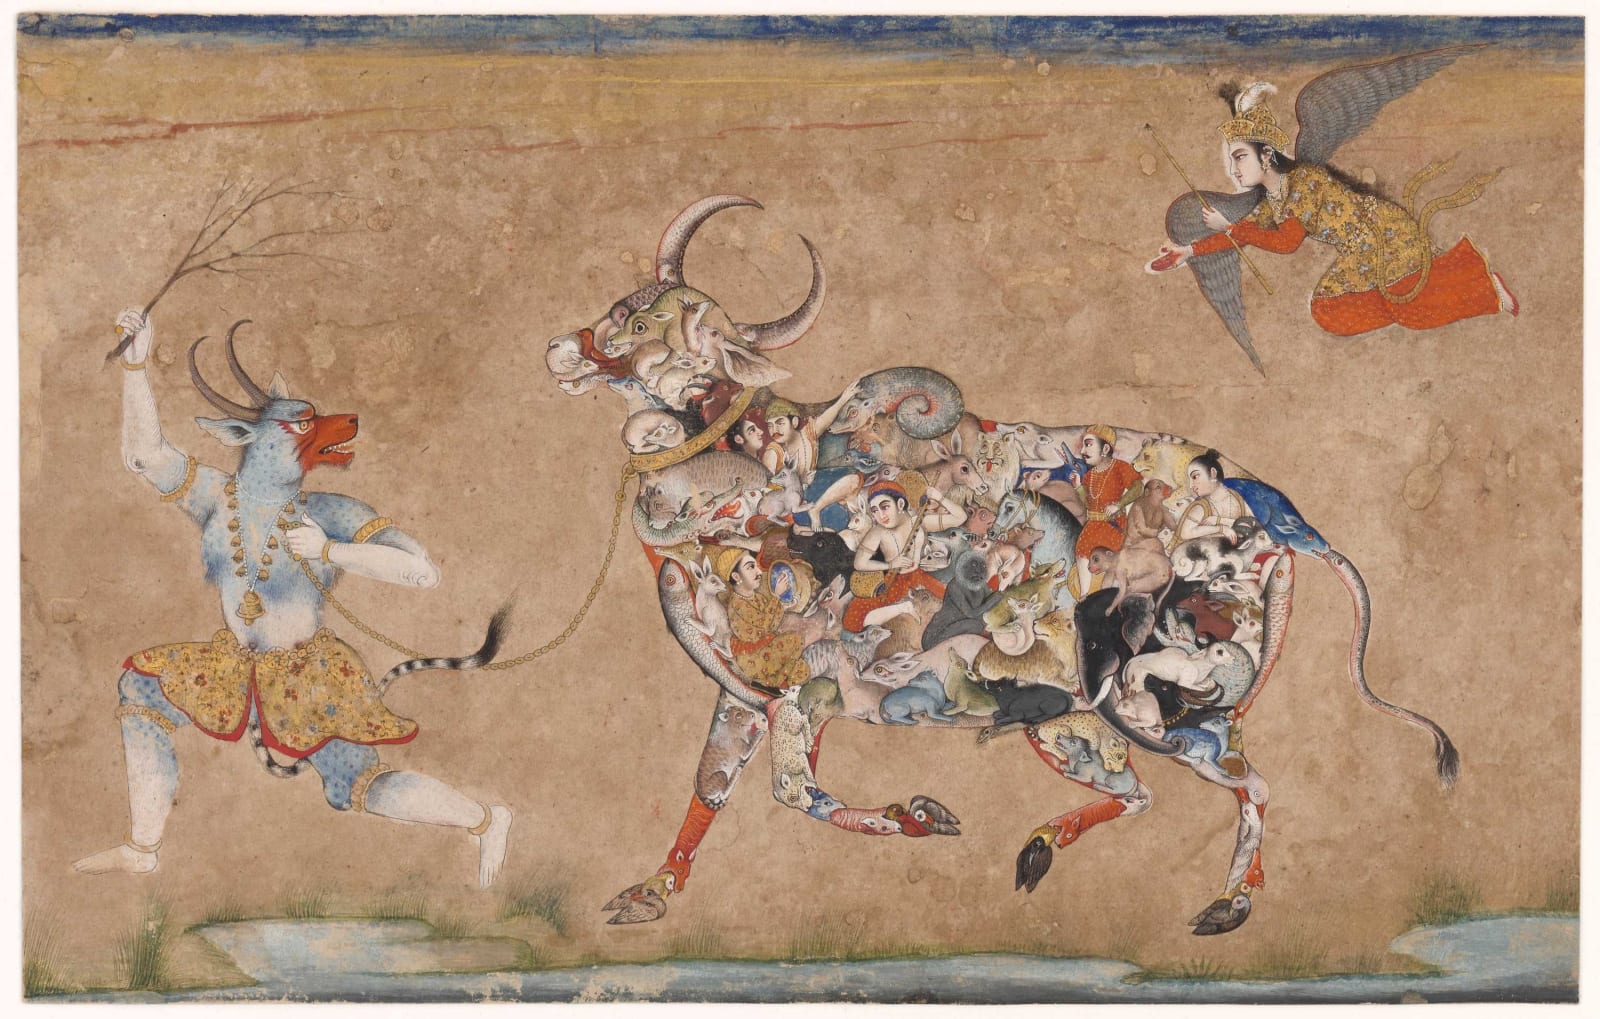 A composite bull led by a demon and followed by a peri, Mughal, 1740-80